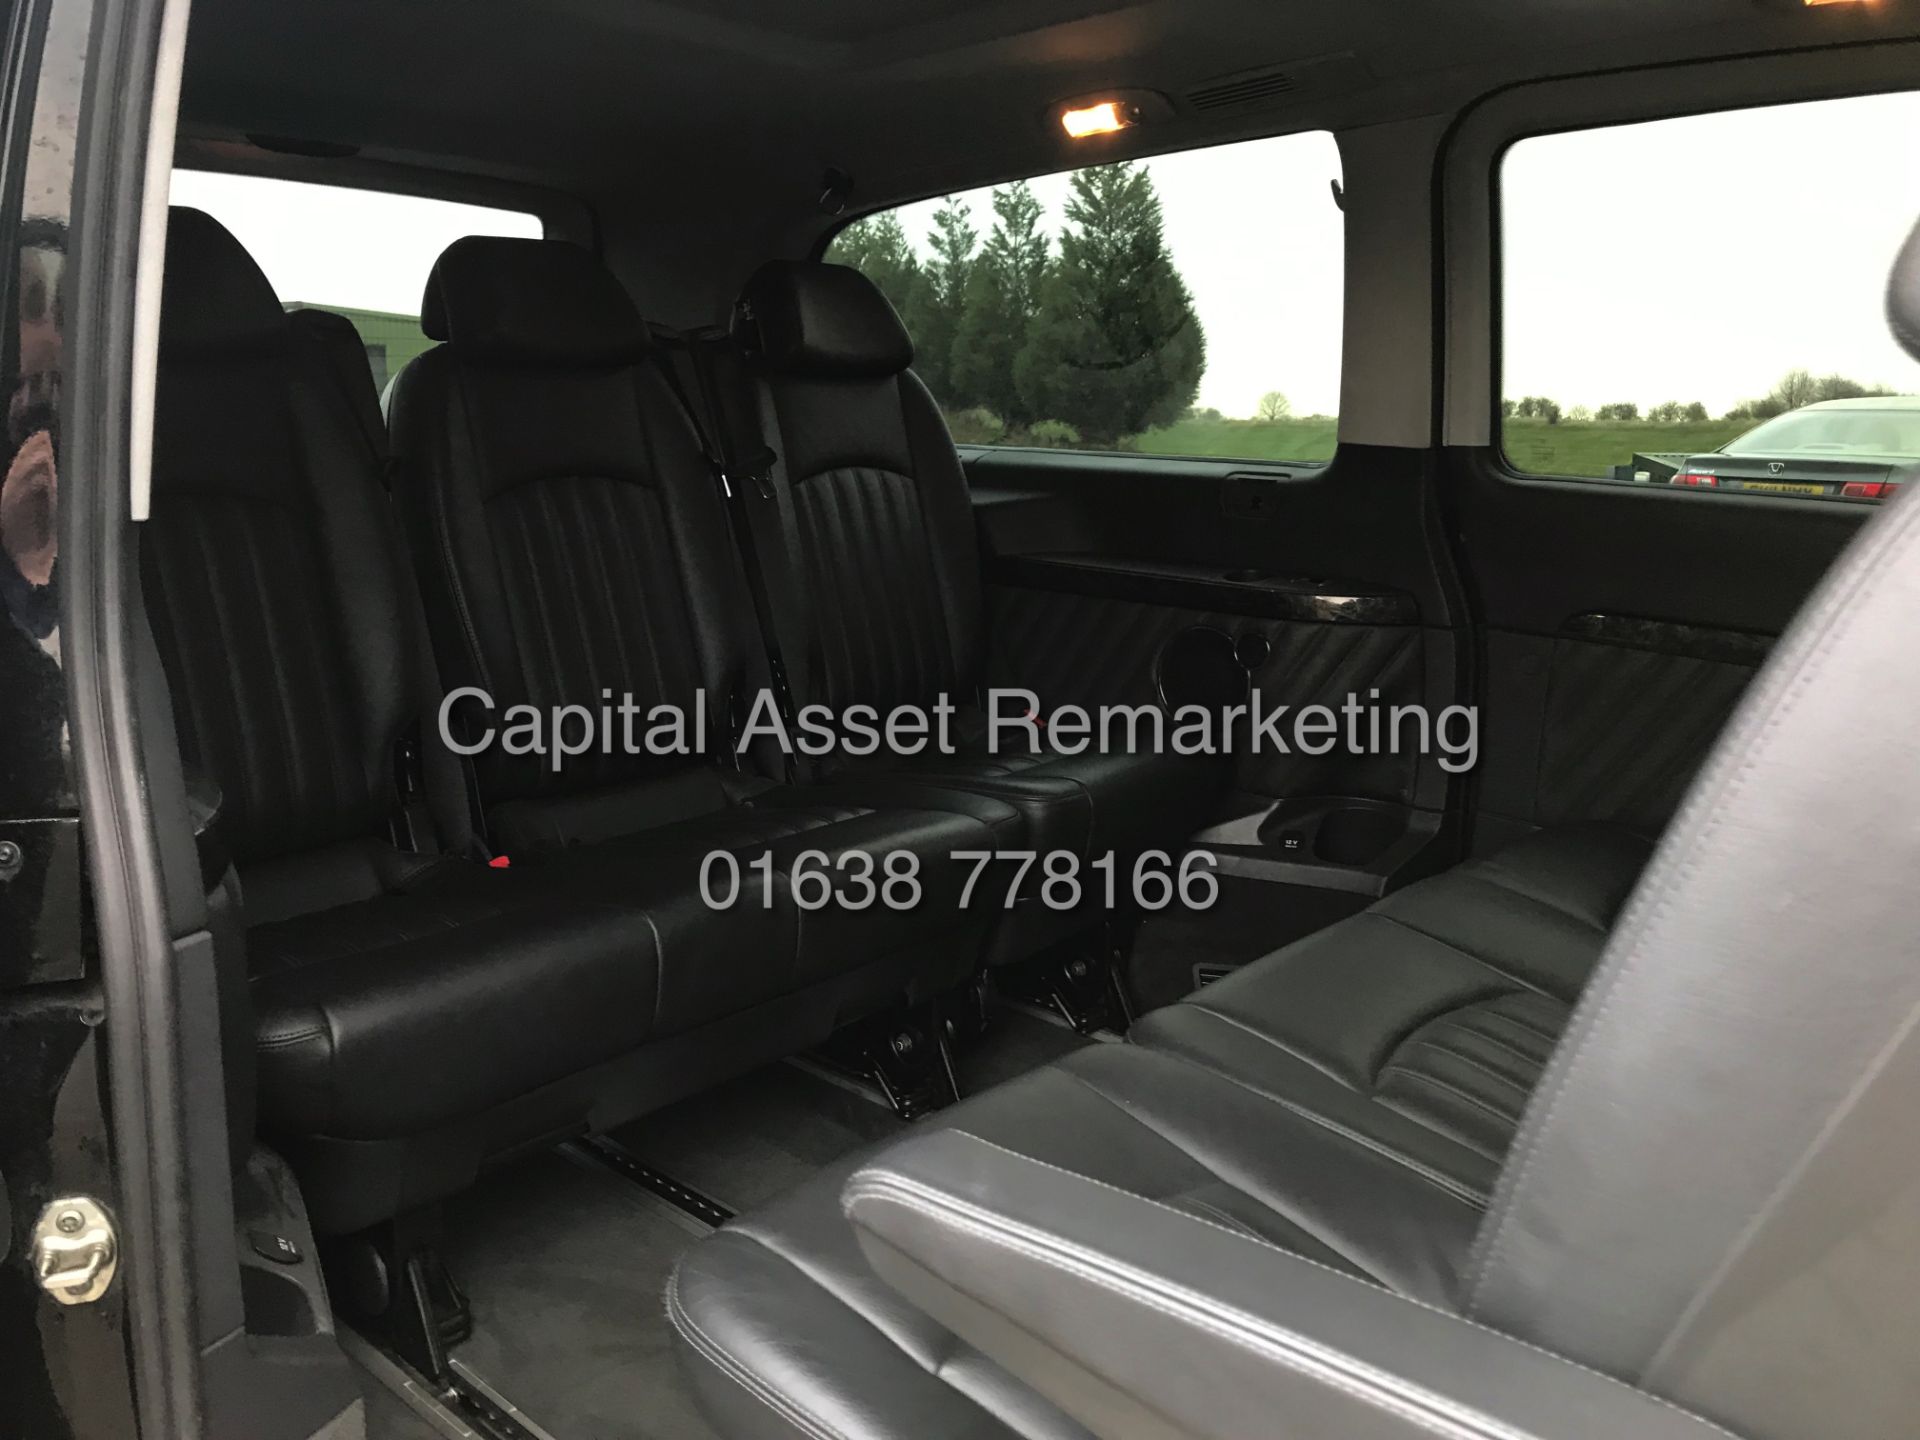 (ON SALE) MERCEDES VIANO 2.2CDI "AMBIENET" XLWB 8 SEATER (14 REG) 1 OWNER - FULLY LOADED - LEATHER - Image 22 of 28